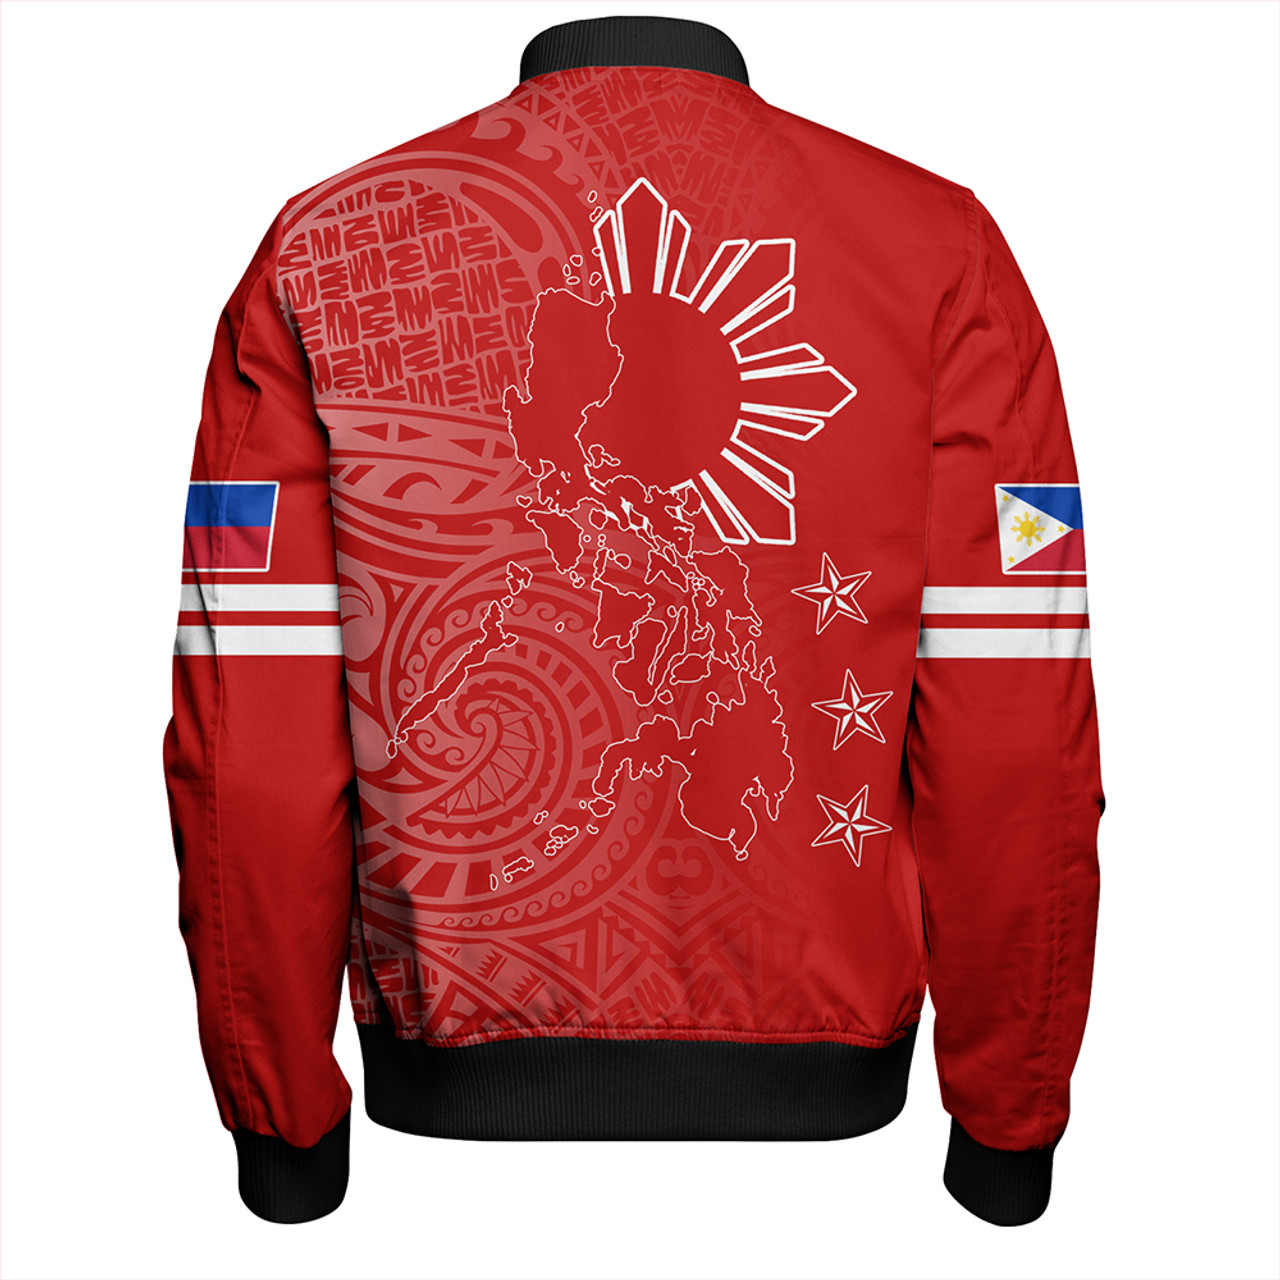 Philippines Bomber Jacket Lauhala Half Concept Red